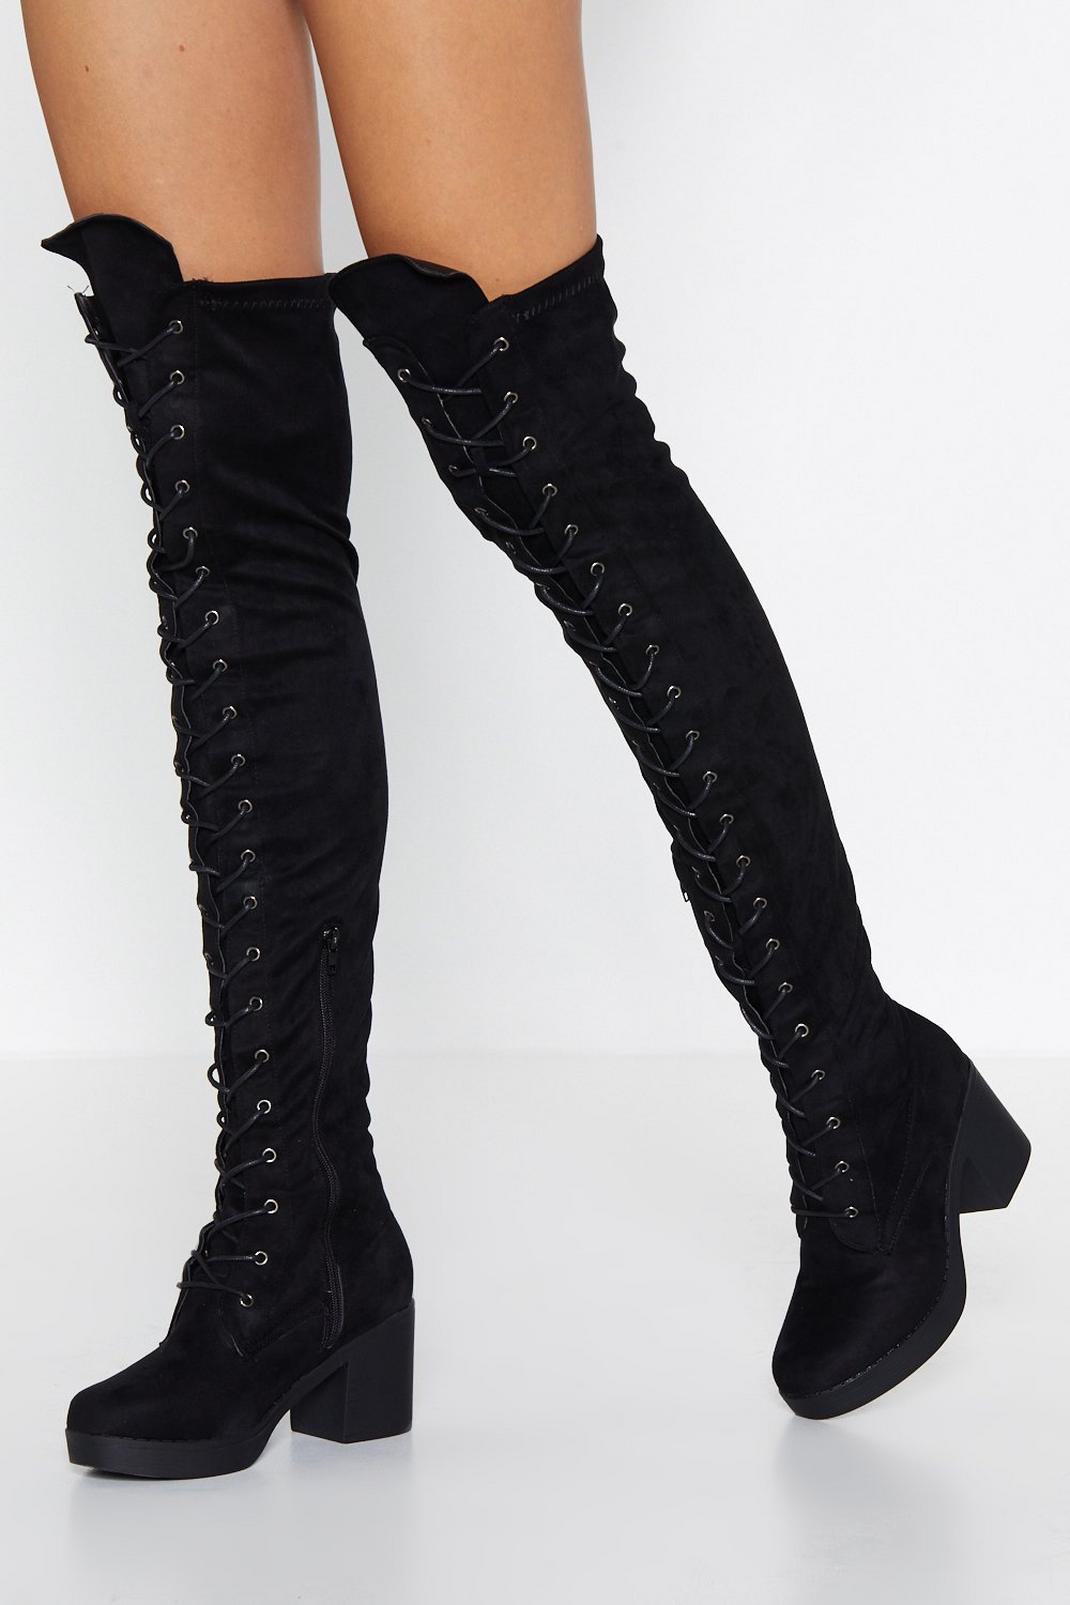 the mall spirit Physics Lace Up Over the Knee Boots | Nasty Gal